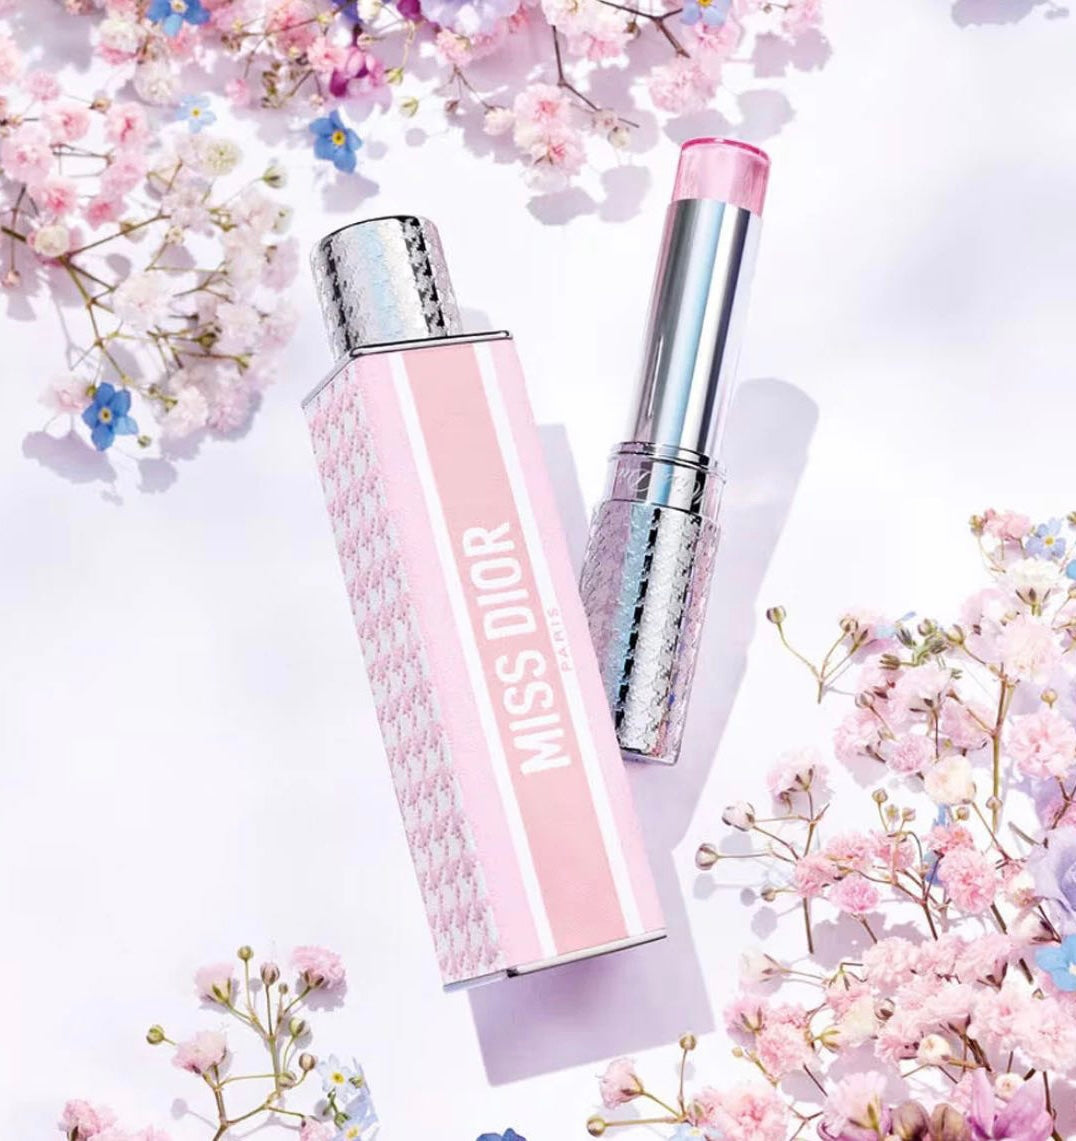 MINI MISS DIOR SOLID PERFUME - BLOOMING BOUQUET